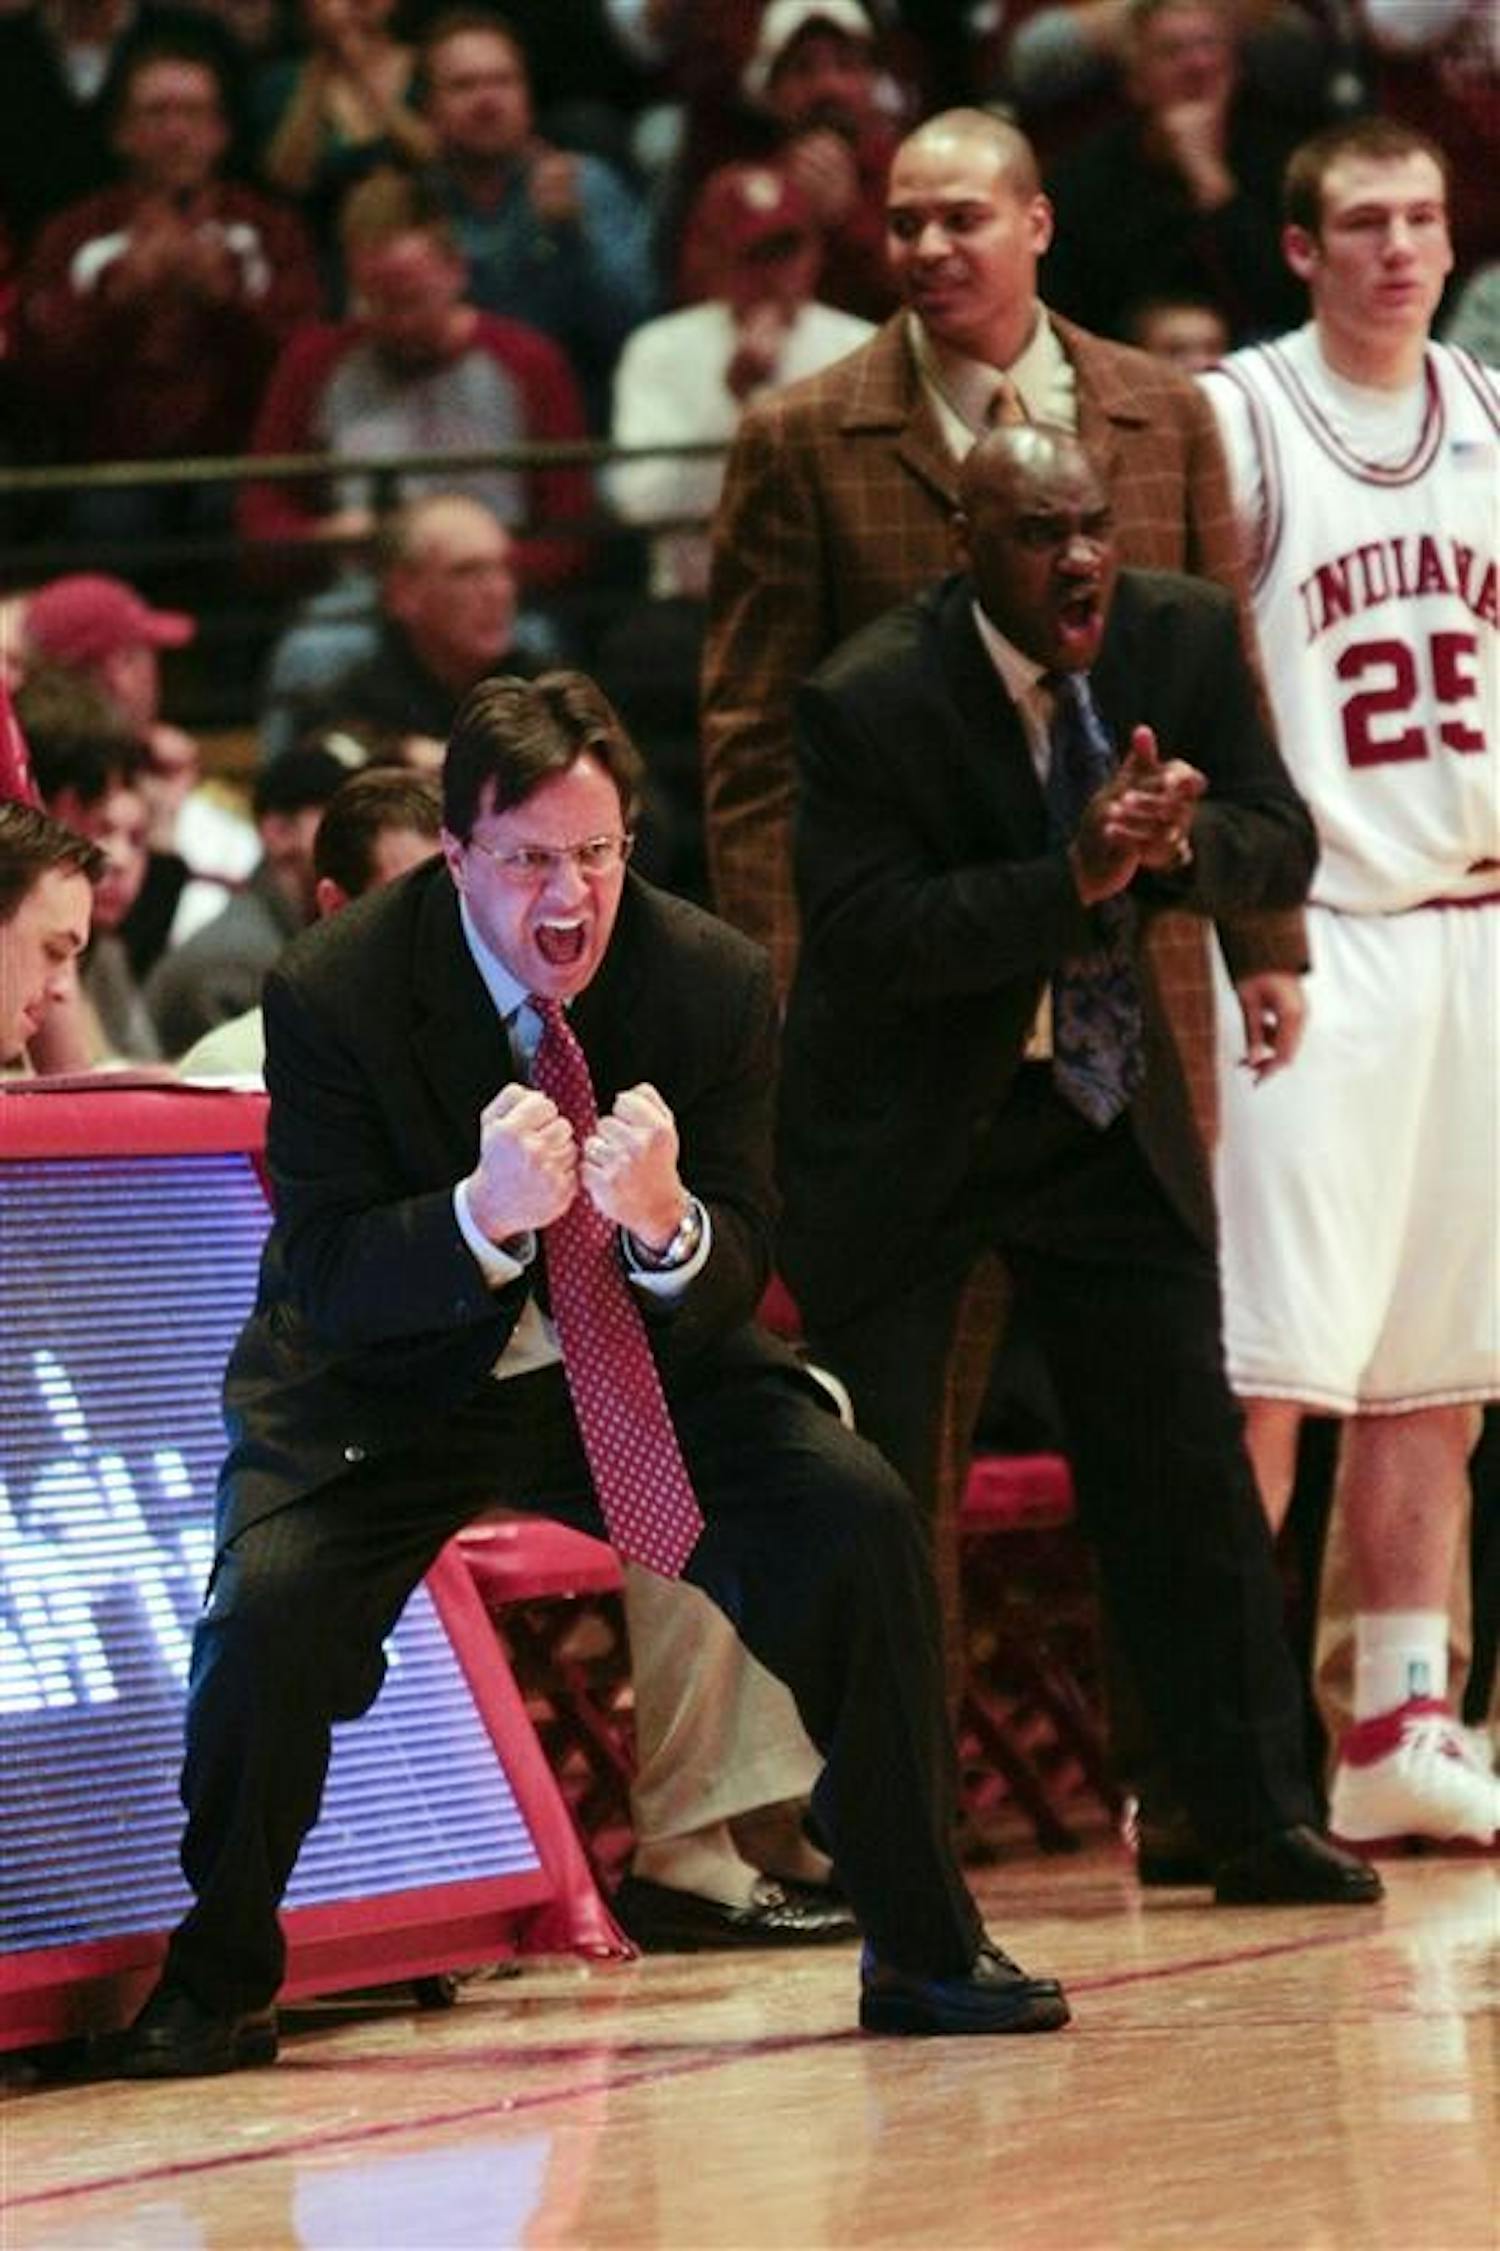 Coach Tom Crean reacts following a Hoosier play during the team's 68-60 victory over Iowa Feb. 4 at Assembly Hall.